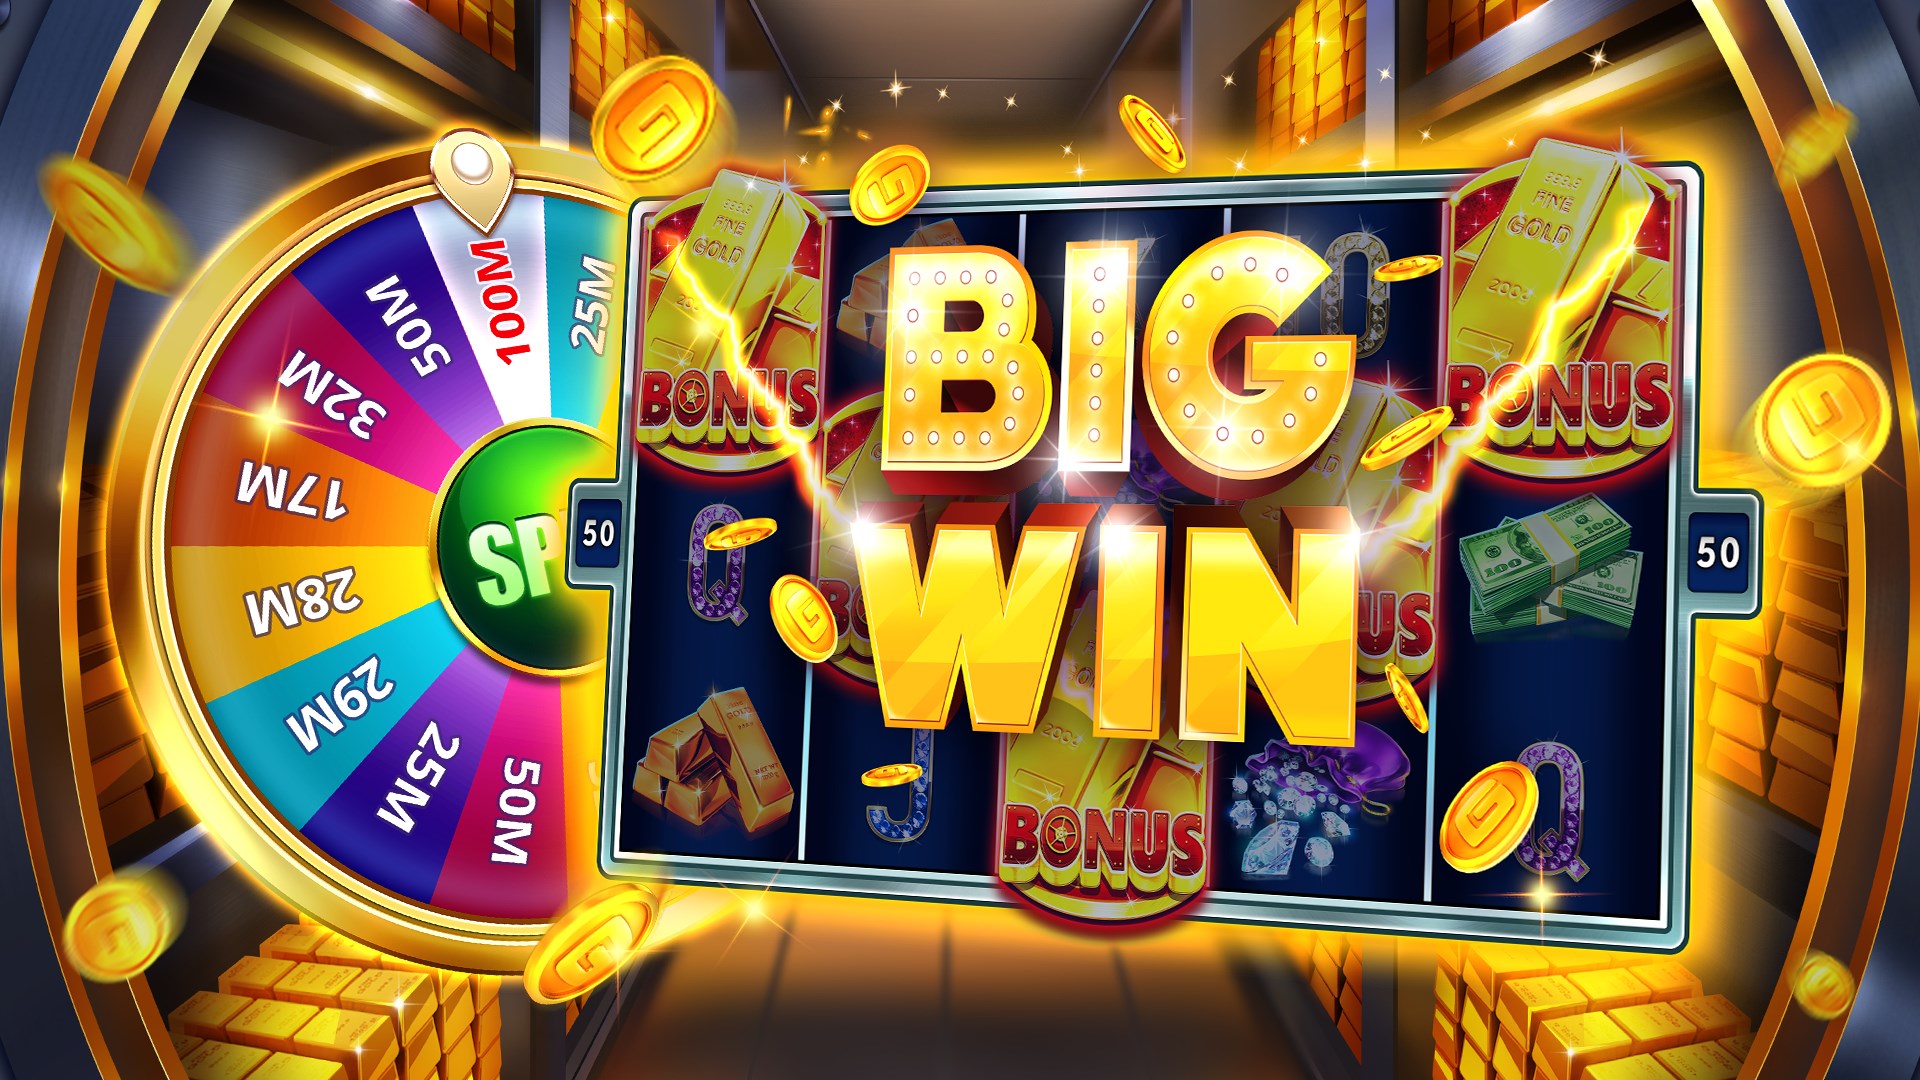 The benefits of playing Pragmatic Play casino games and slots